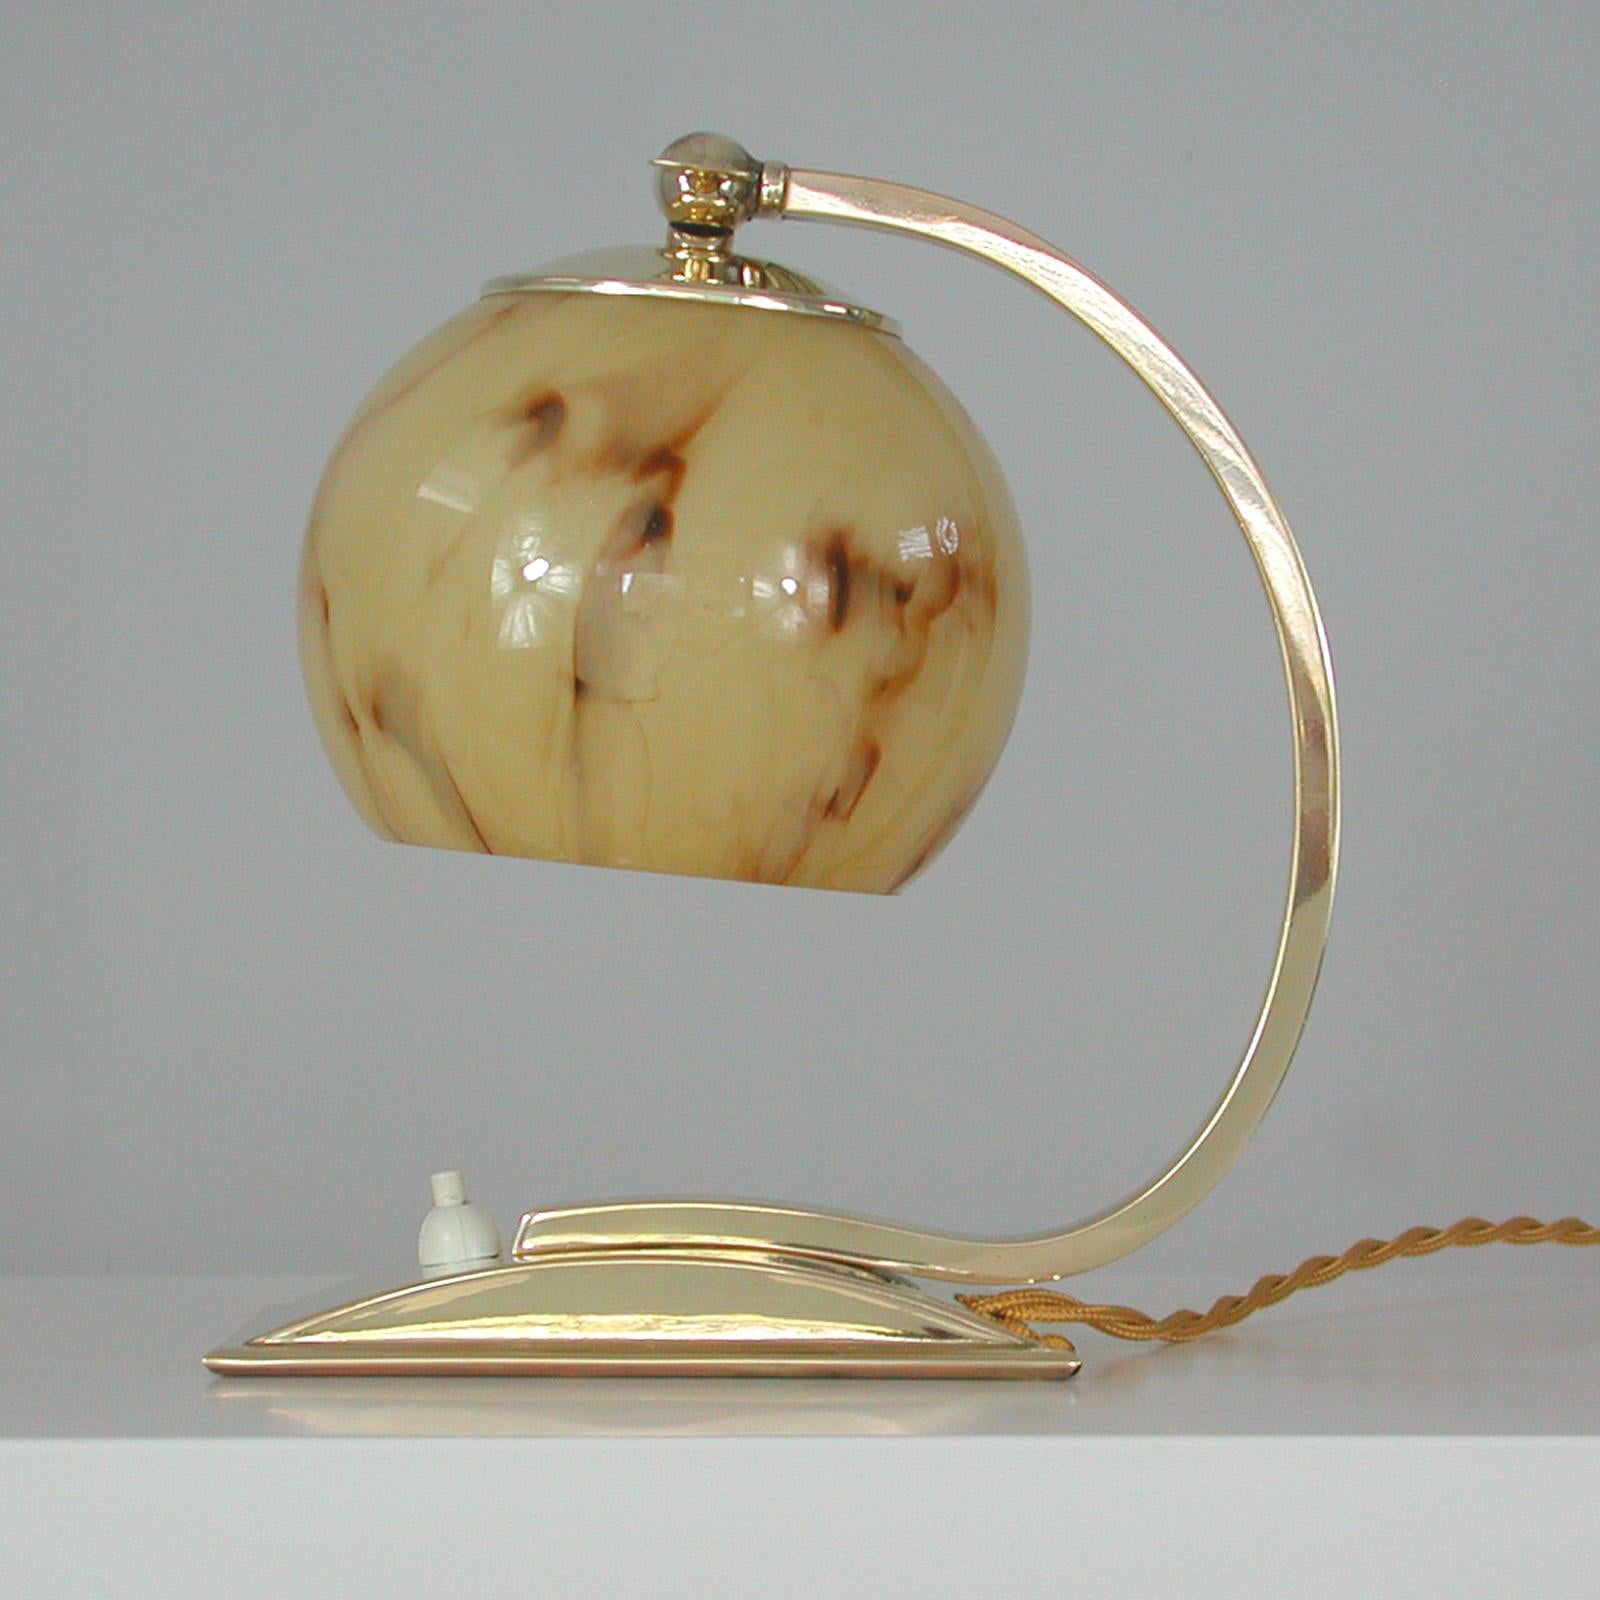 This unusual vintage table or bedside lamp was made in Germany in the 1930s-1940s during the Bauhaus period. It is made of polished brass and has got an adjustable lamp shade in cream marbled opaline glass.

The lamp can be used as a table lamp as